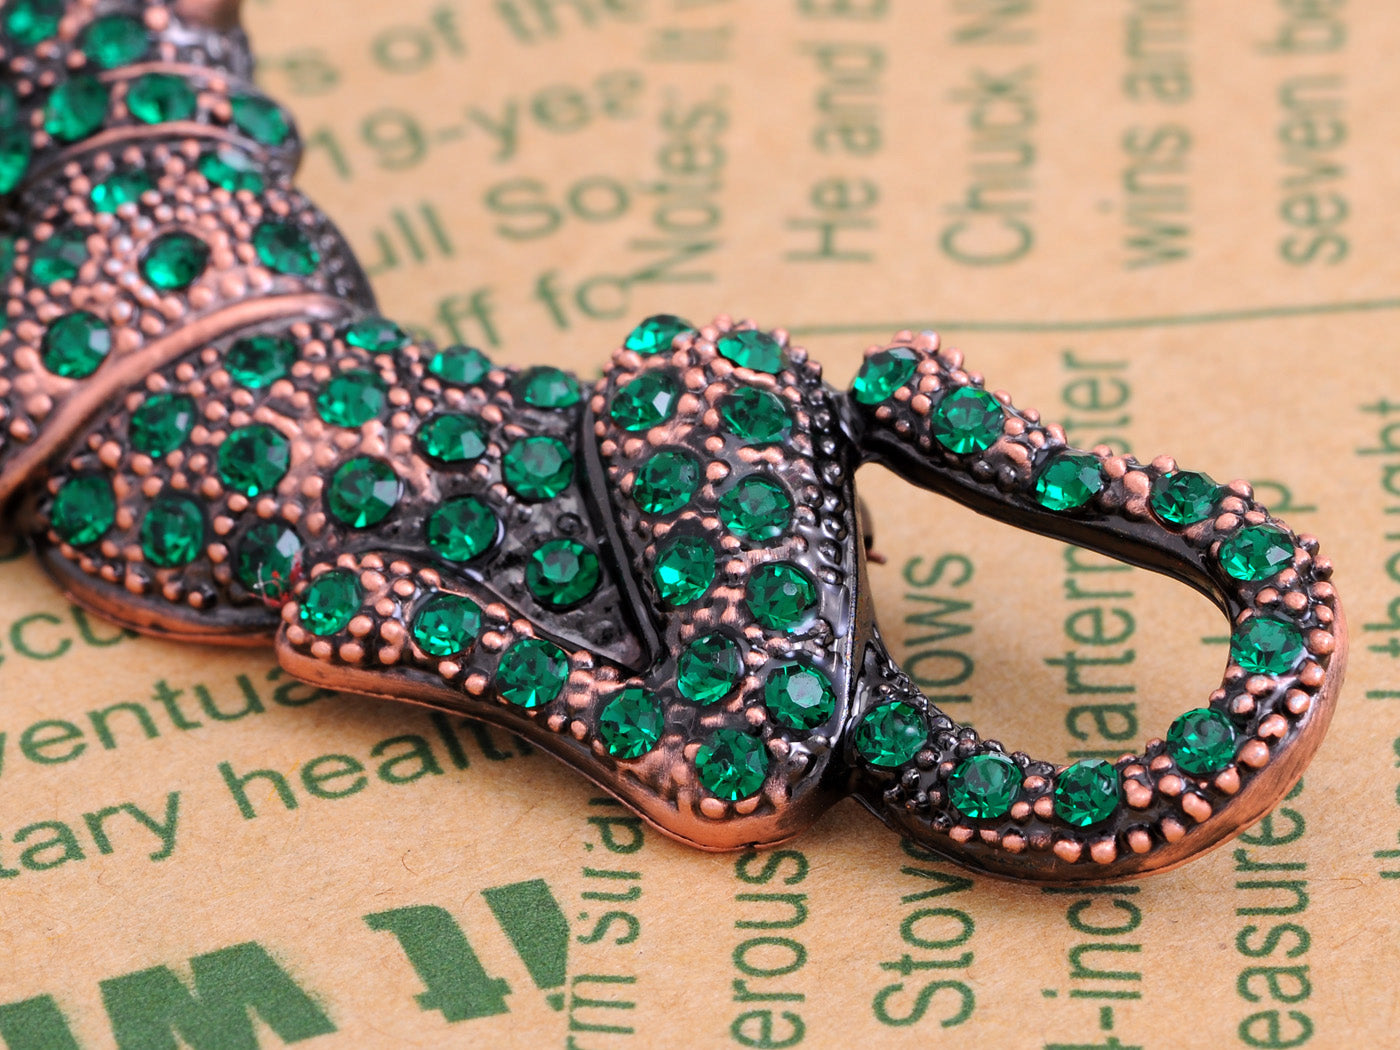 Reproduct Emerald Green Leopard Pin Style Brooch